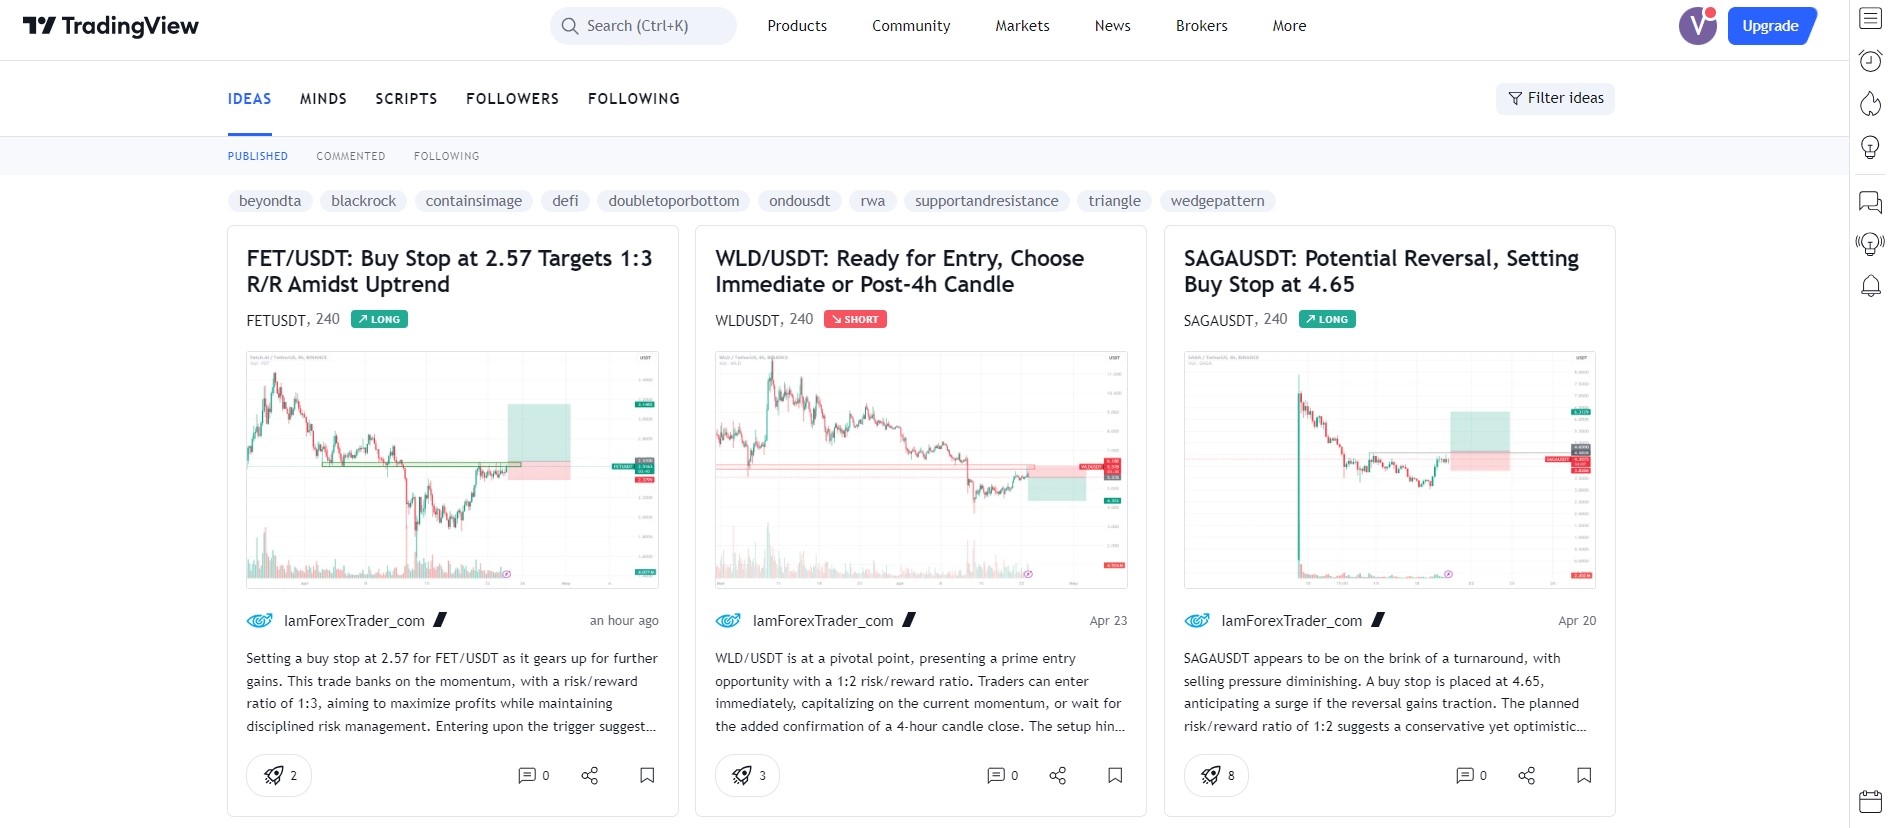 Our trading ideas on TradingView